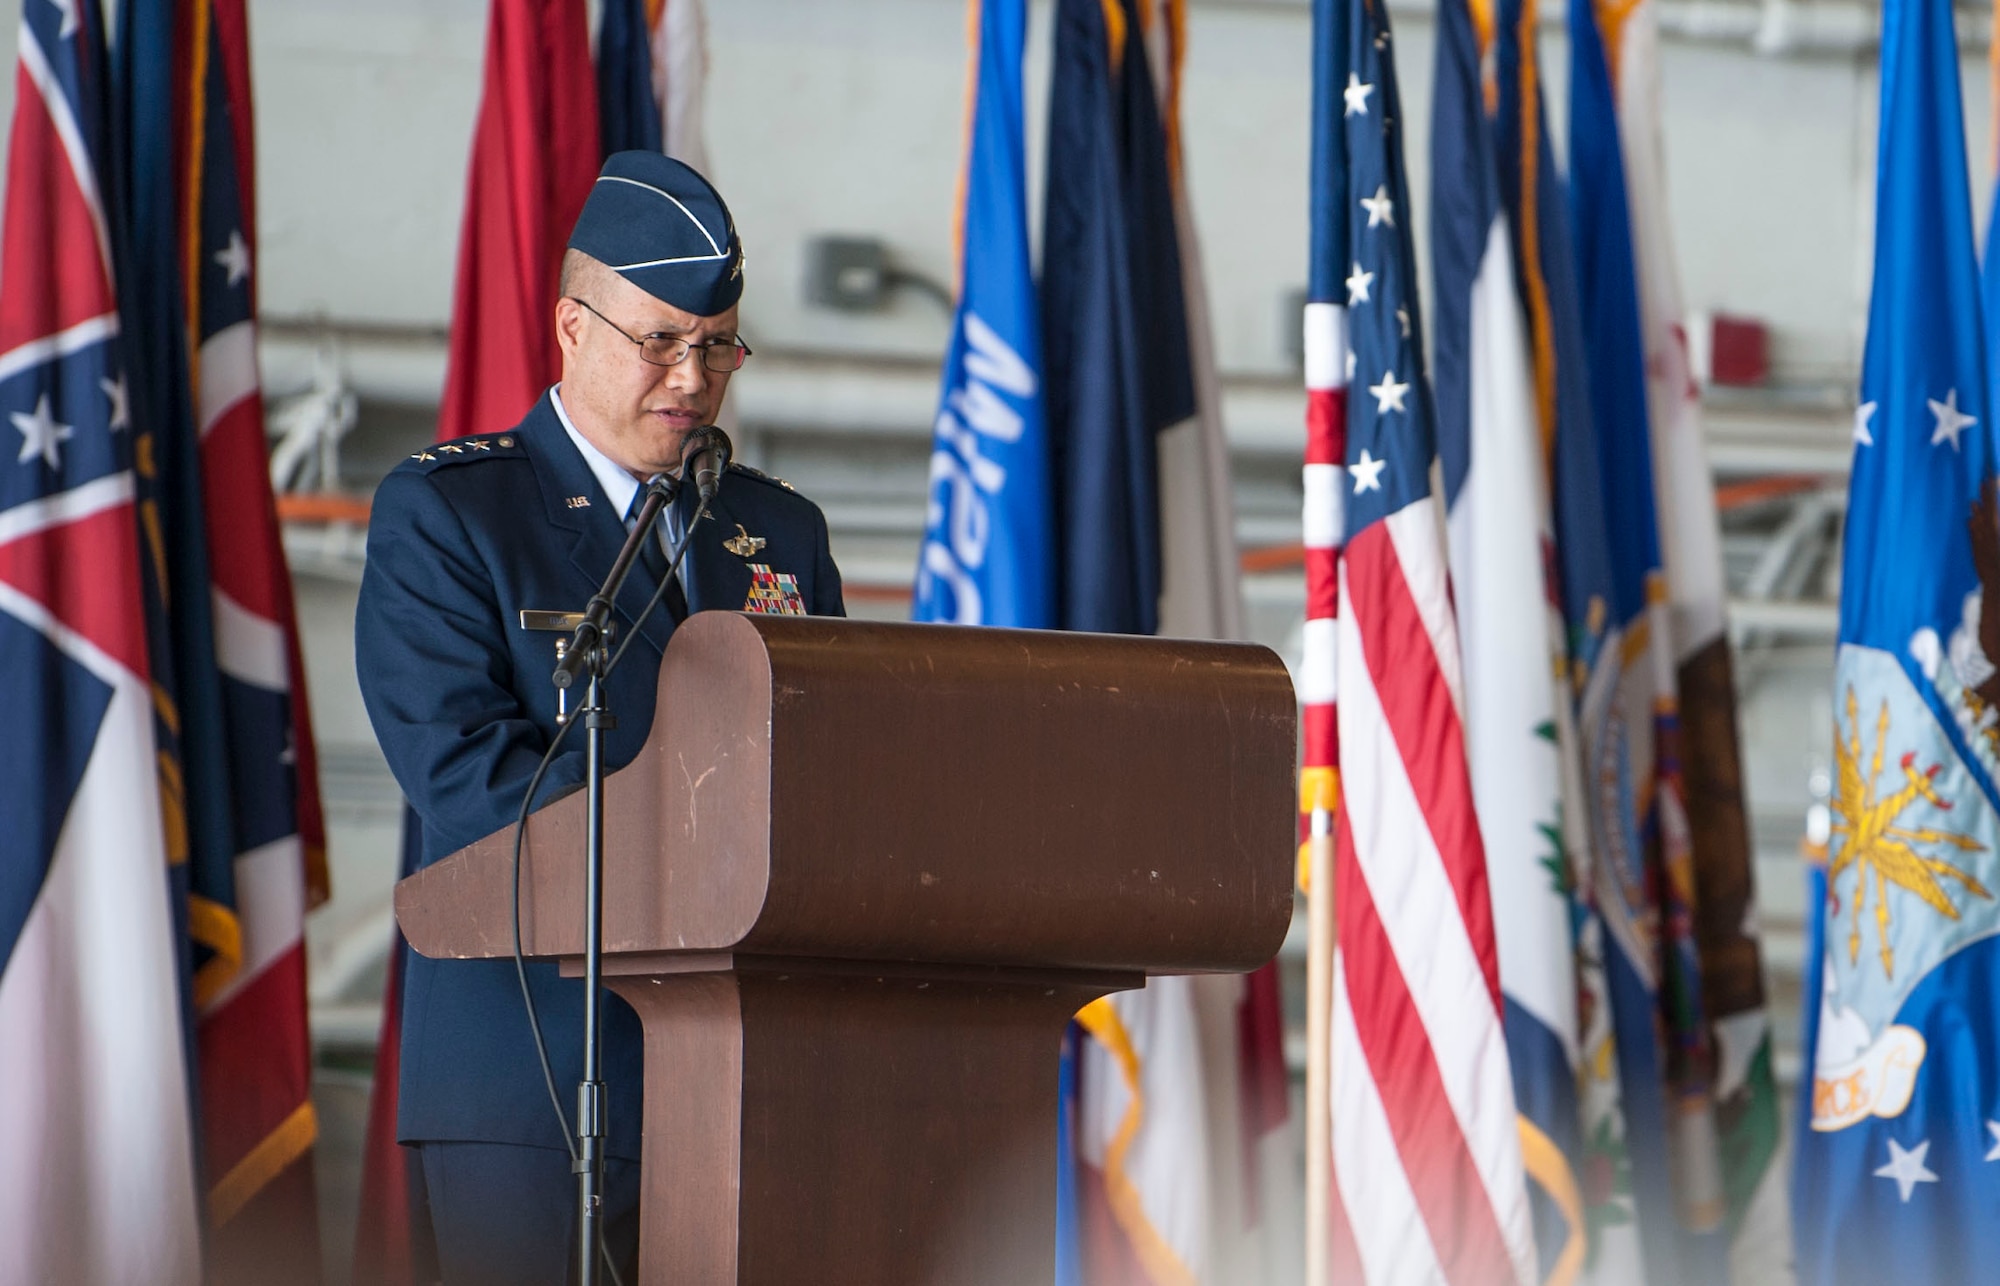 U.S. Air Force Lt. Gen. GI Tuck, 18th Air Force commander, delivers opening remarks during the 6th Air Mobility Wing change of command ceremony at MacDill Air Force Base, Fla., June 29, 2018.